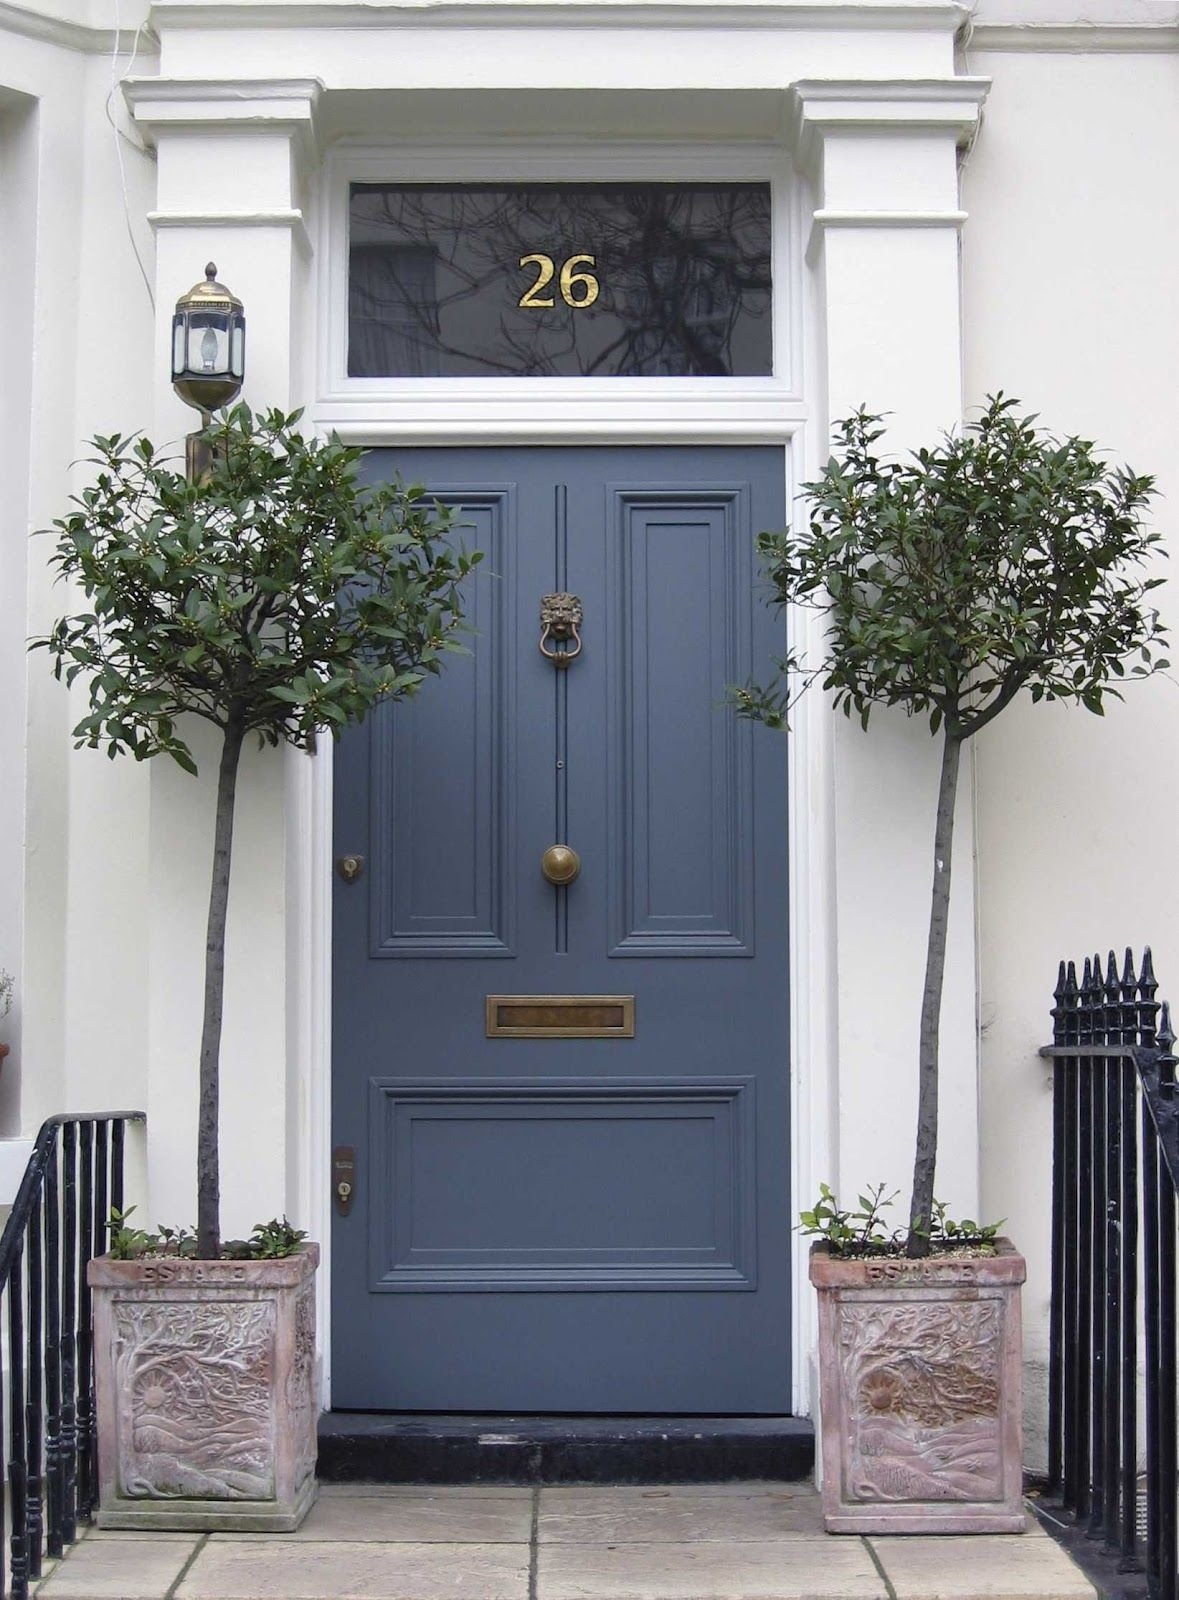 10 Best Front Door Paint Color Ideas front door ideas potted trees curb appeal and front doors 2022